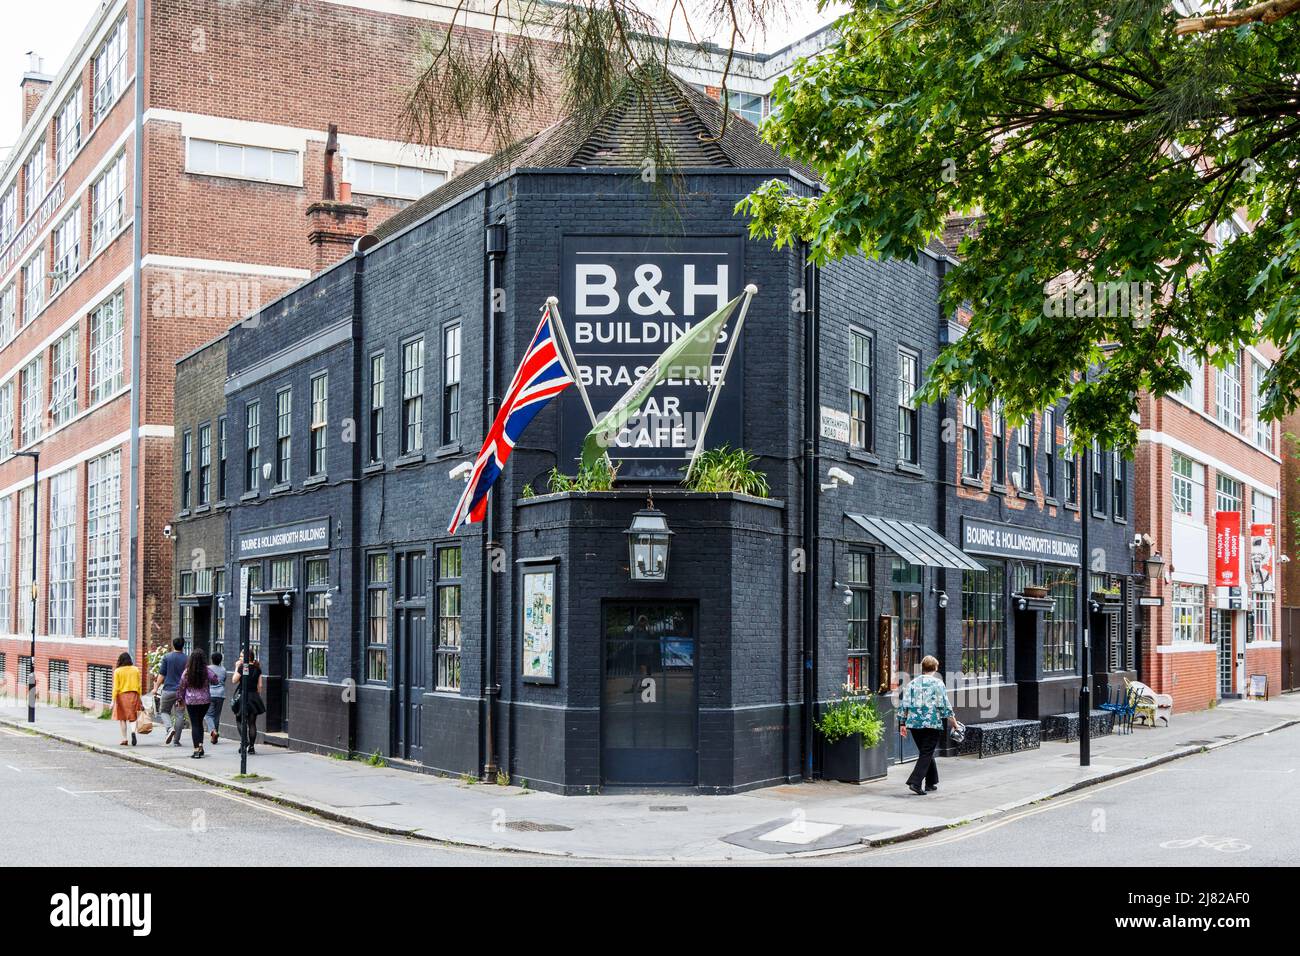 The Bourne & Hollingsworth buildings, a bar and restaurant on Northampton Road in Clerkenwell, London, UK Stock Photo